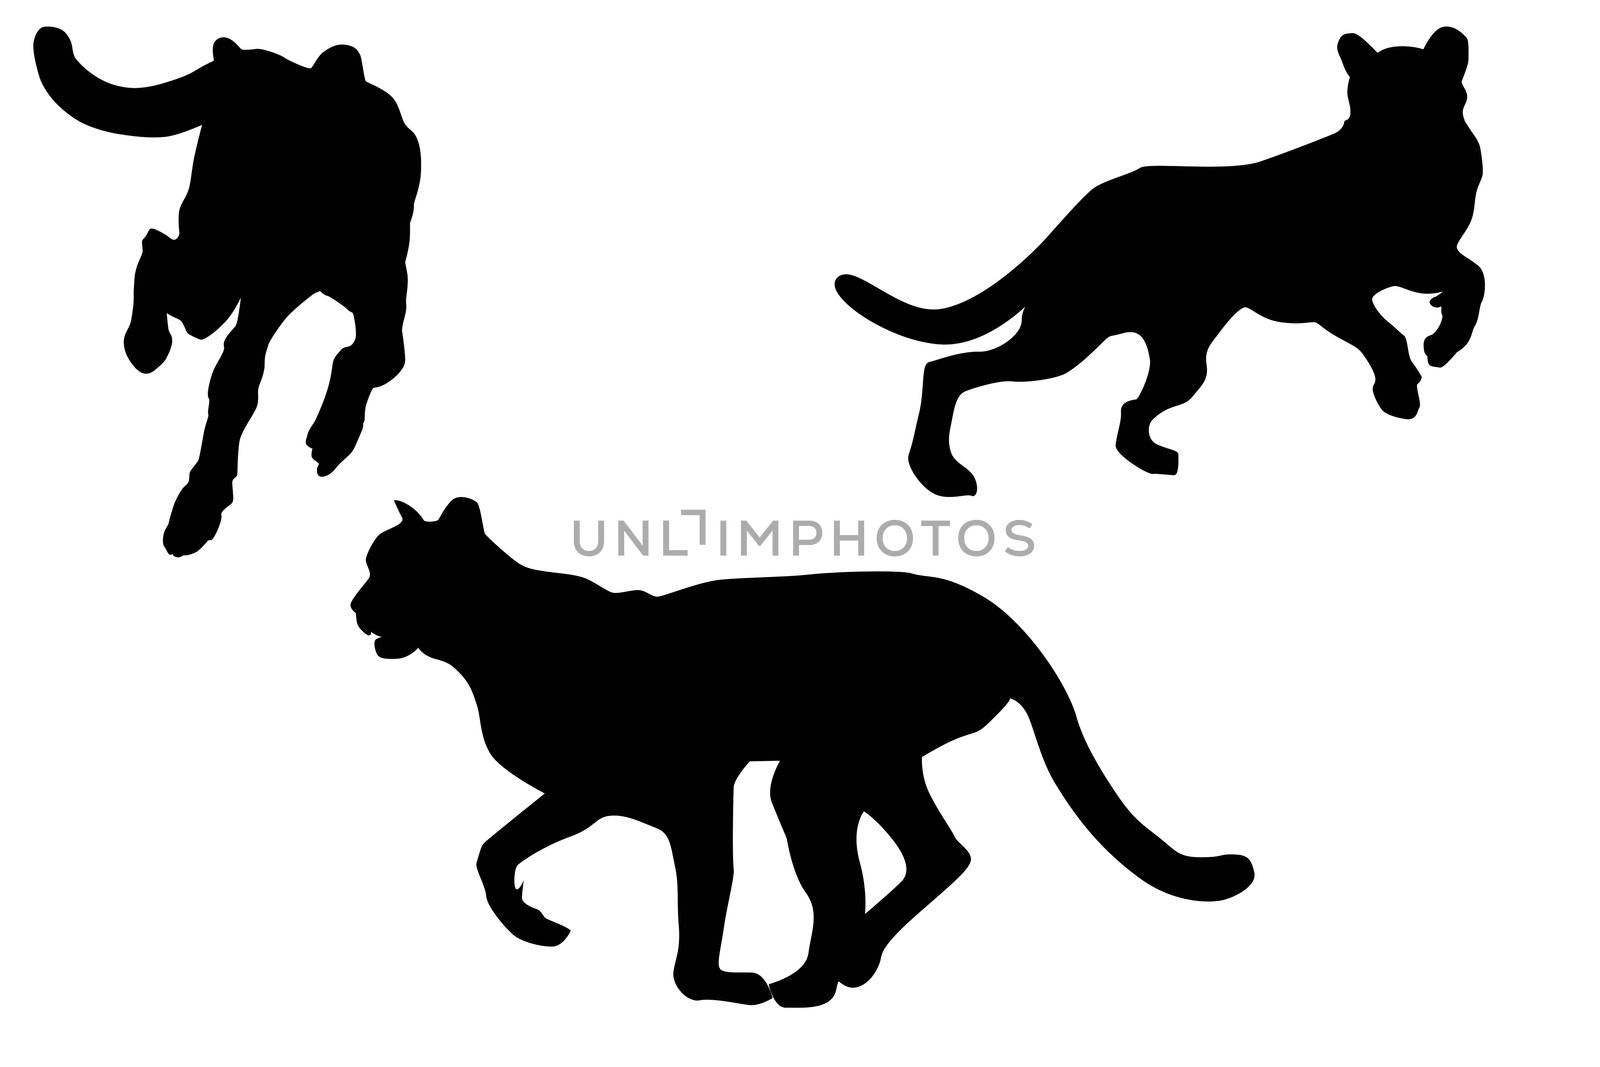 Cheetah silhouettes with clipping path